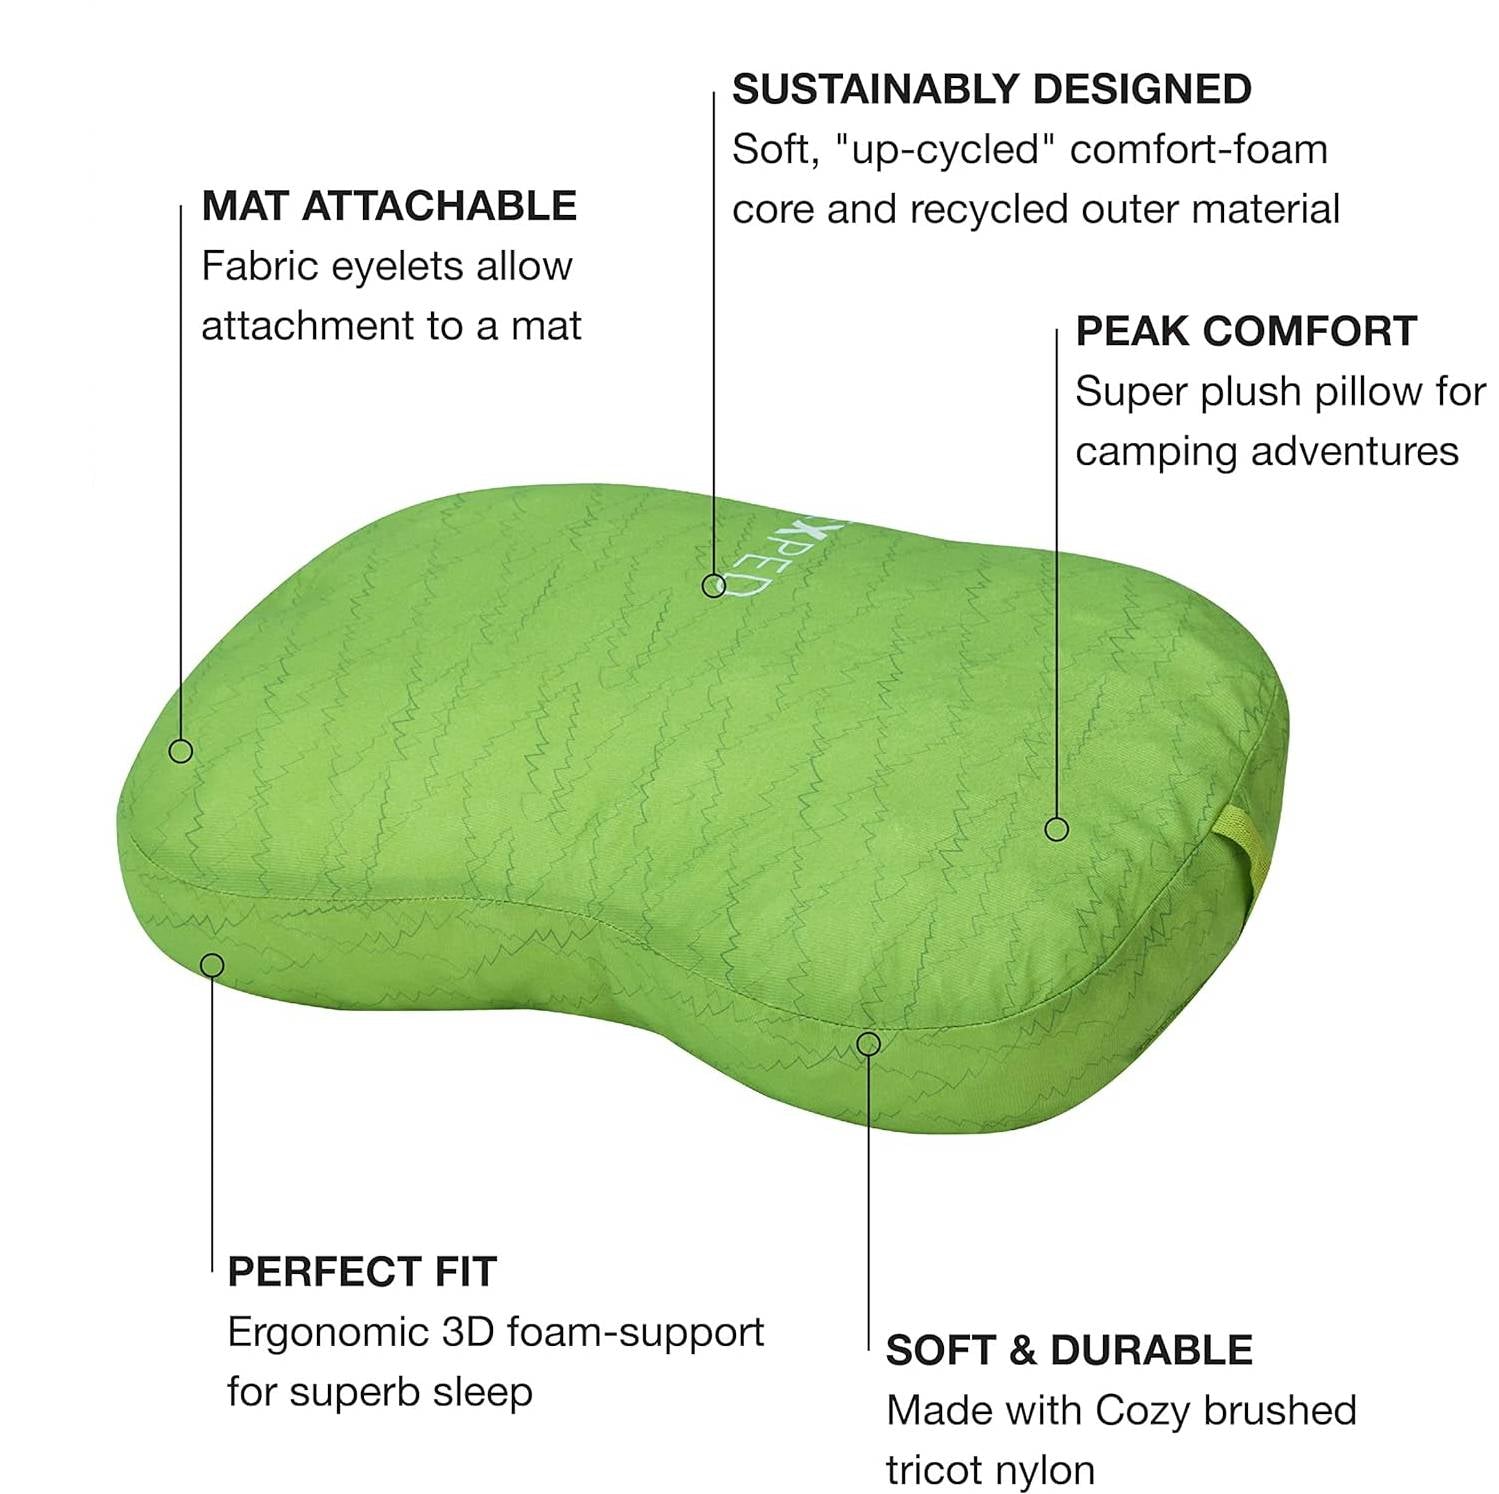 Check out all the features of the Exped DeepSleep Pillow!